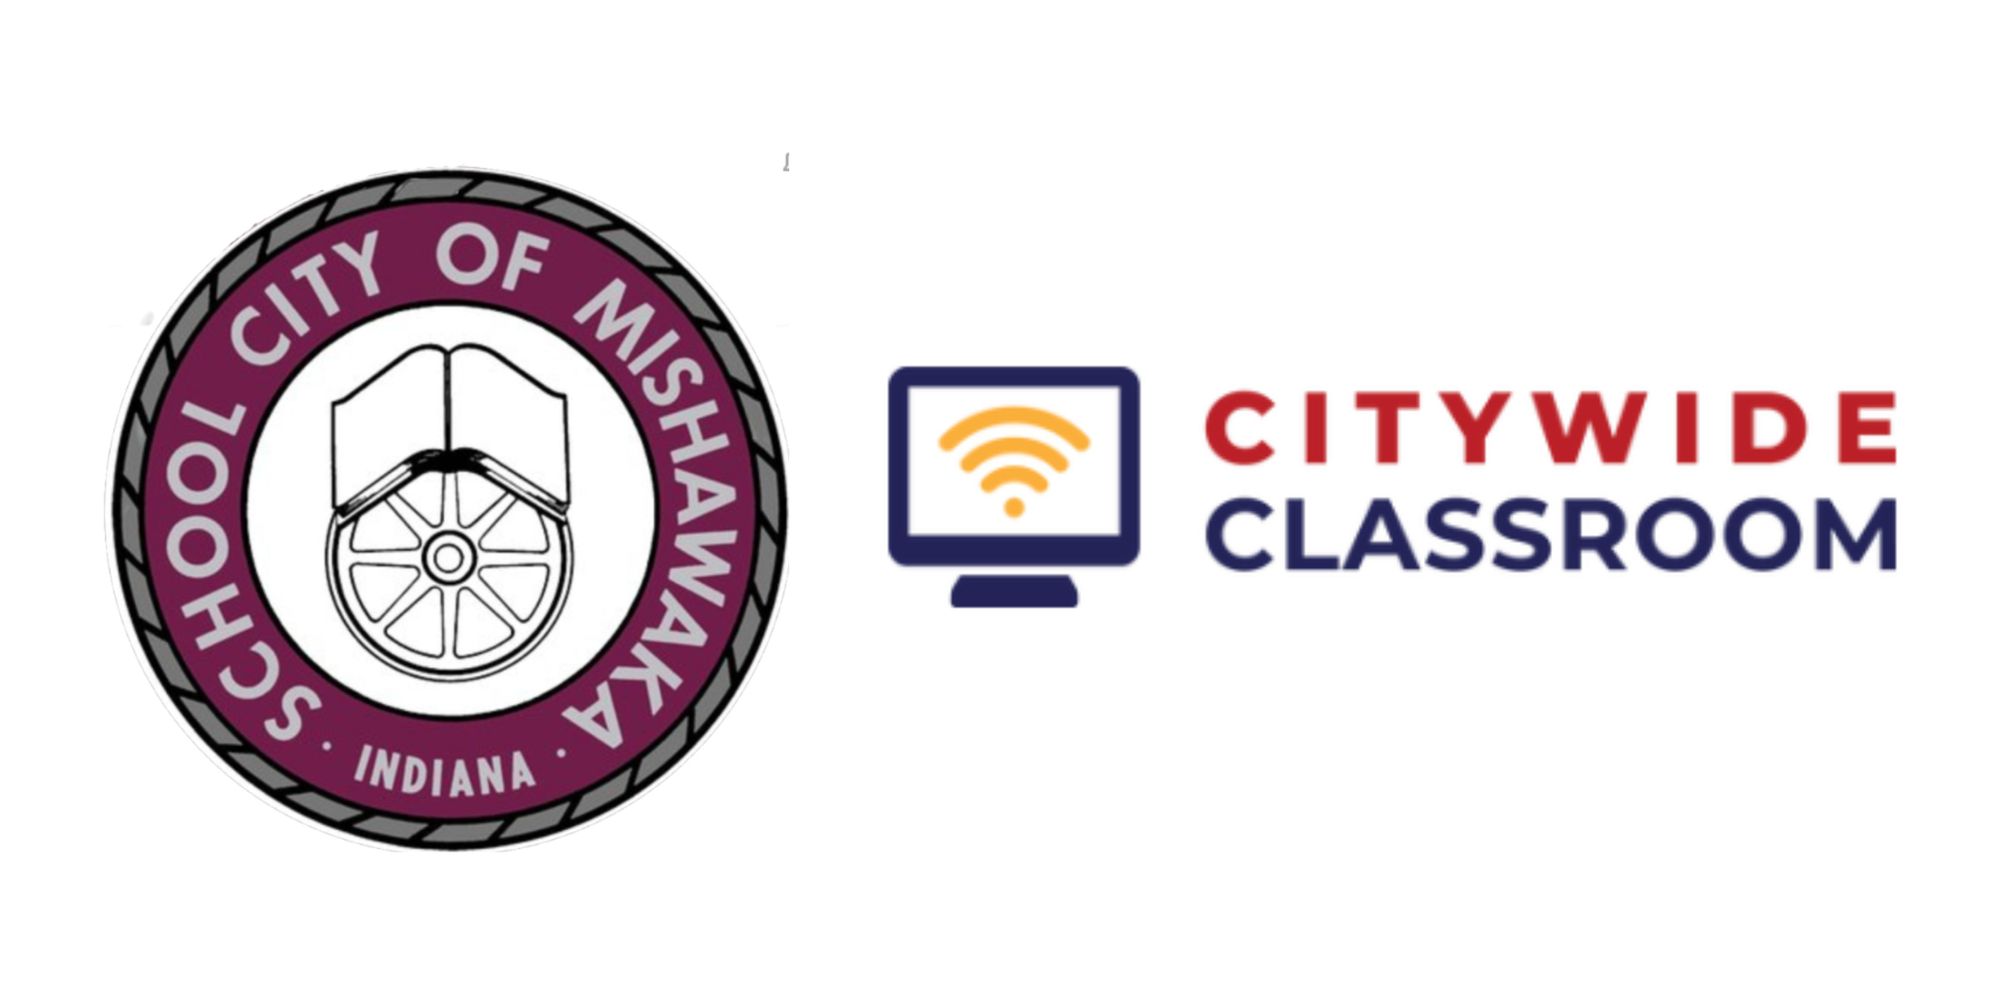 Citywide Classroom: School City of Mishawaka Expands Internet Accessibility